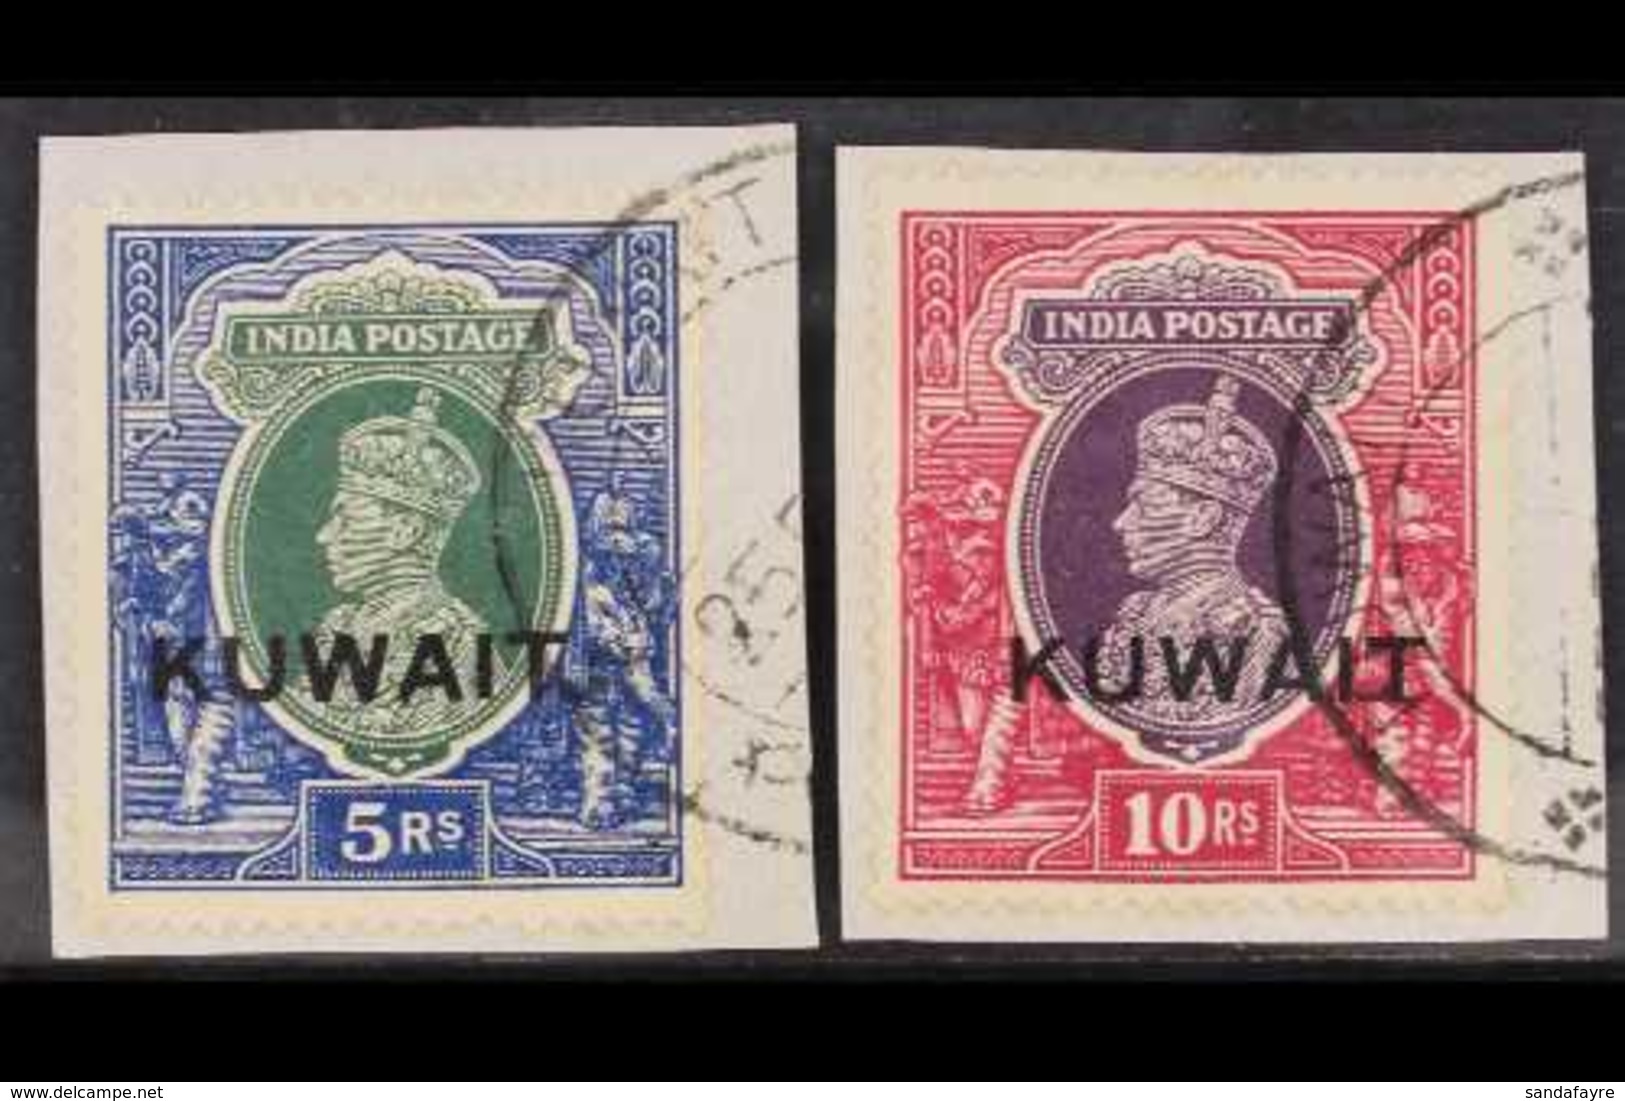 1939 5r And 10r King George VI Stamps Of India Overprinted "KUWAIT", SG 49/50, Each Very Fine Used On Piece. (2 Stamps)  - Koweït